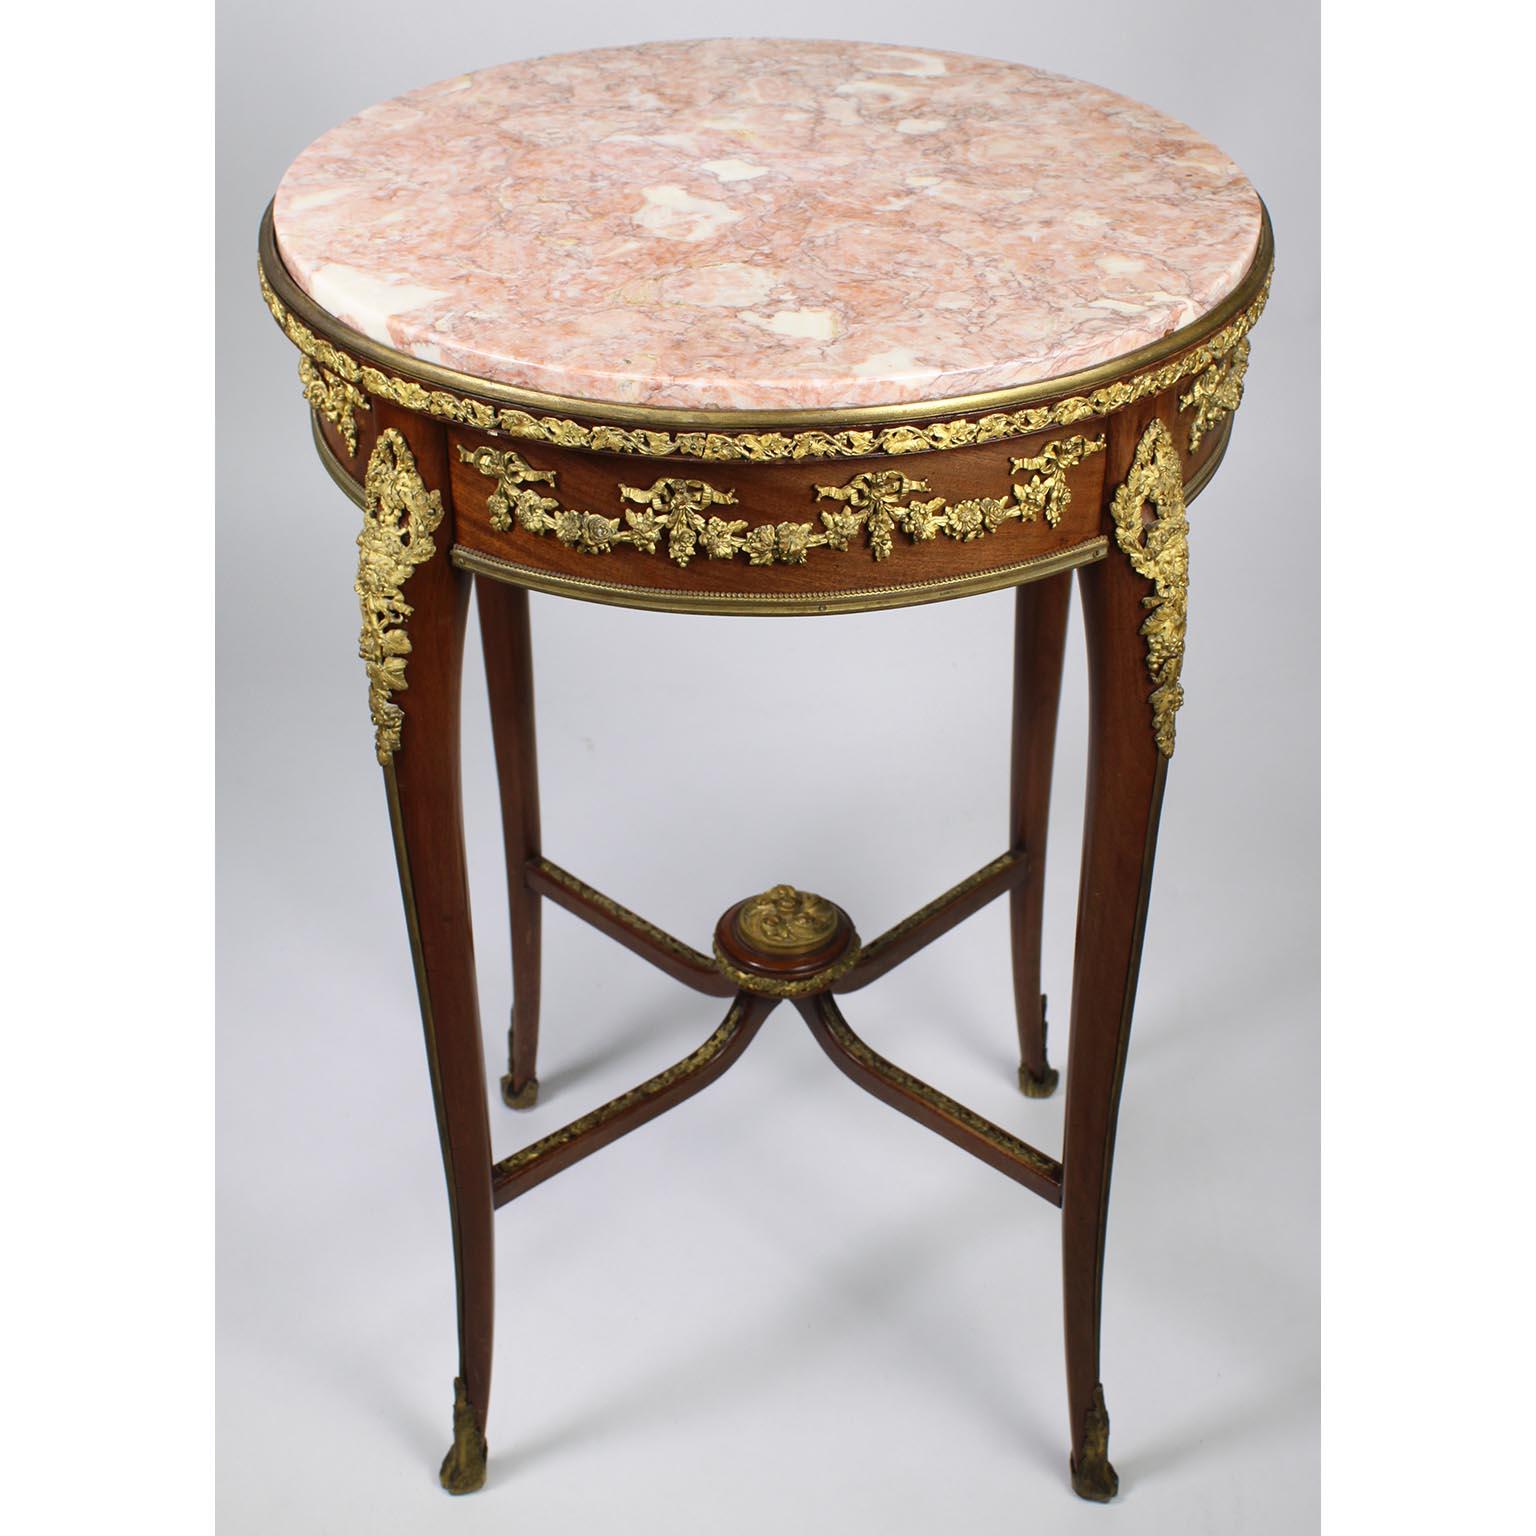 A fine French 19th-20th century Mahogany and Gilt-Bronze (Ormolu) Mounted Belle Époque Gueridon Circular Side-Table with Marble Top, Attributed to François Linke (1855-1946). The single-drawer end table inset with a round veined pink marble top